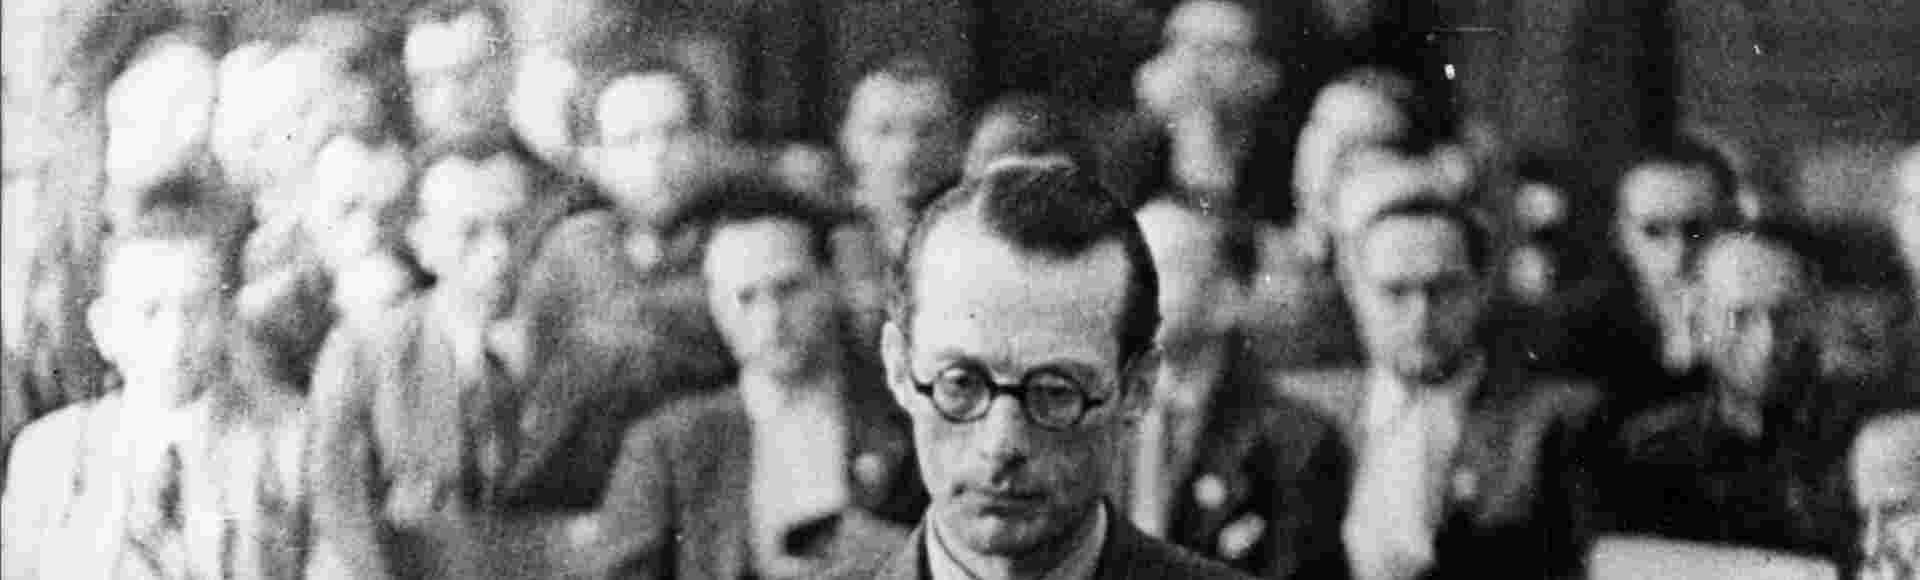 Nazi resistance leader Count Schwerin von Schwanenfeld during his trial for his involvement in the failed July 20 plot.